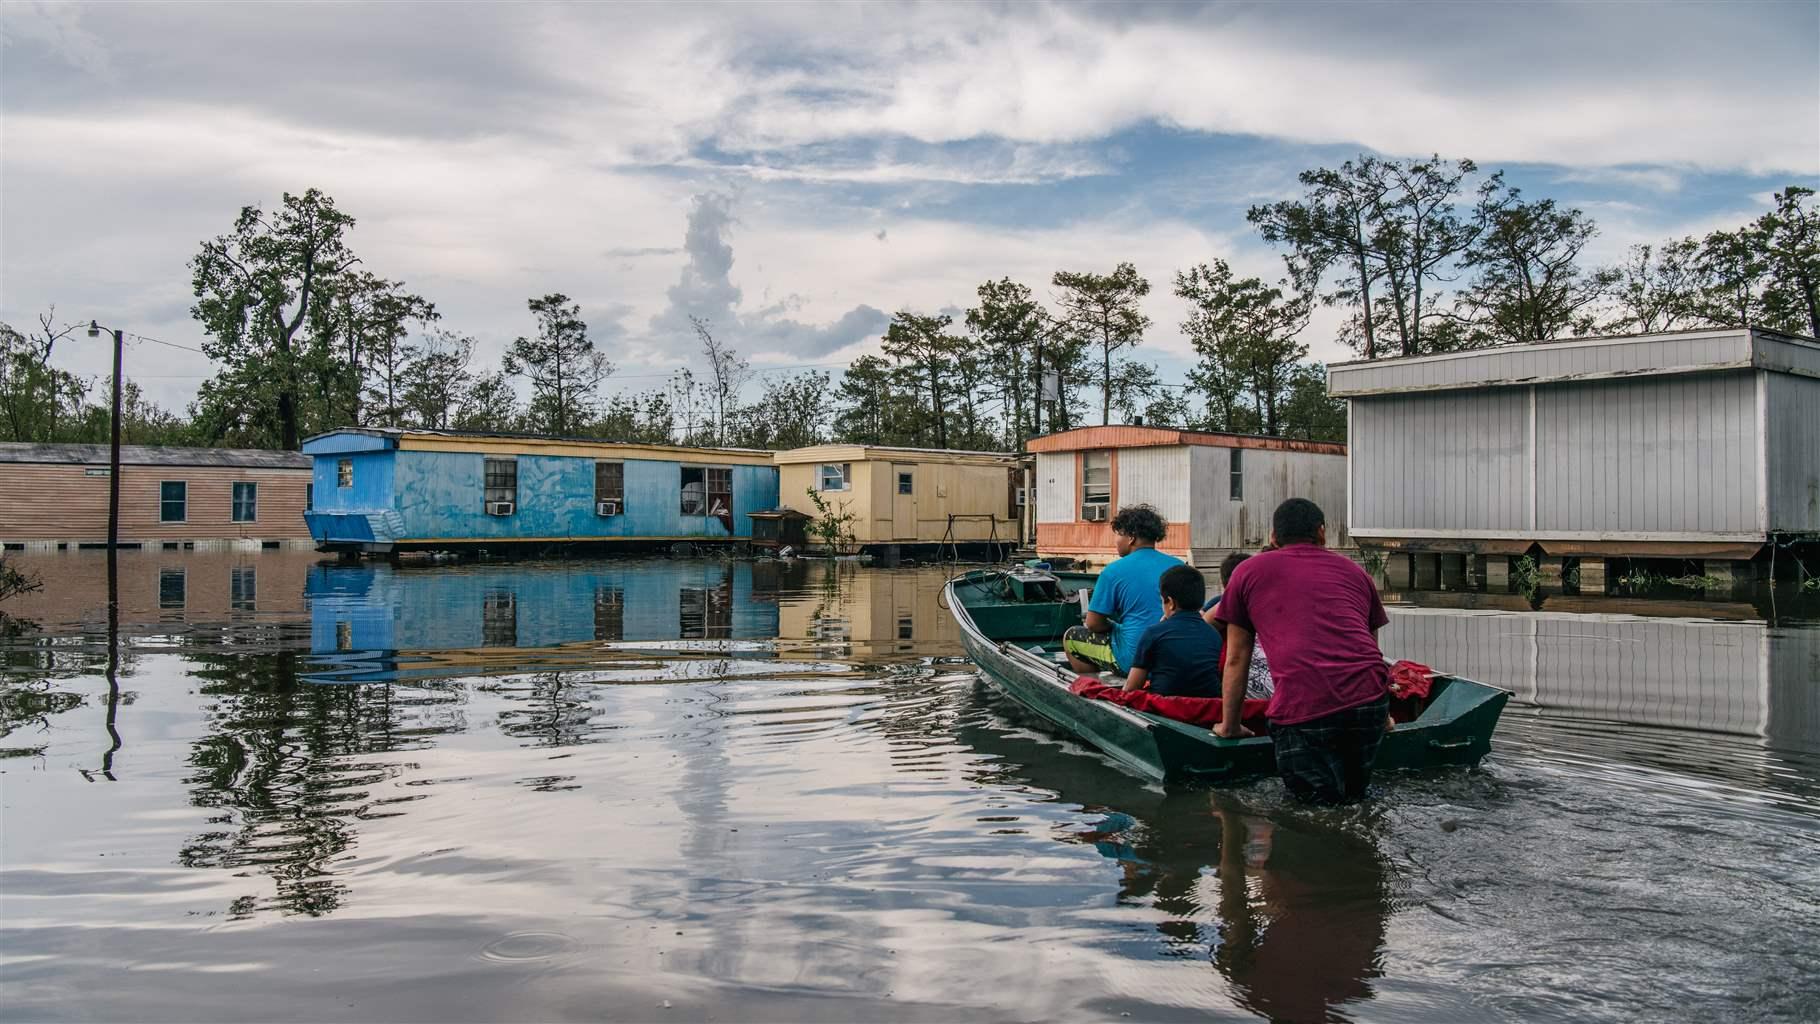 A family in a small boat travel through flooded streets in Barataria, Louisiana.